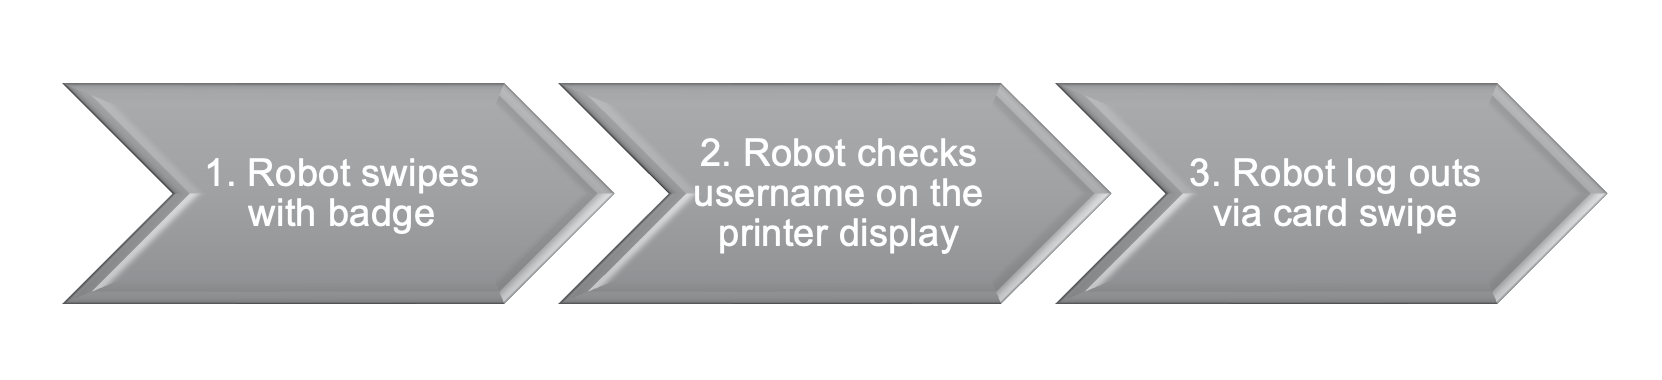 Blog - In-Post Image - Process for Card Reader Testing with Robots